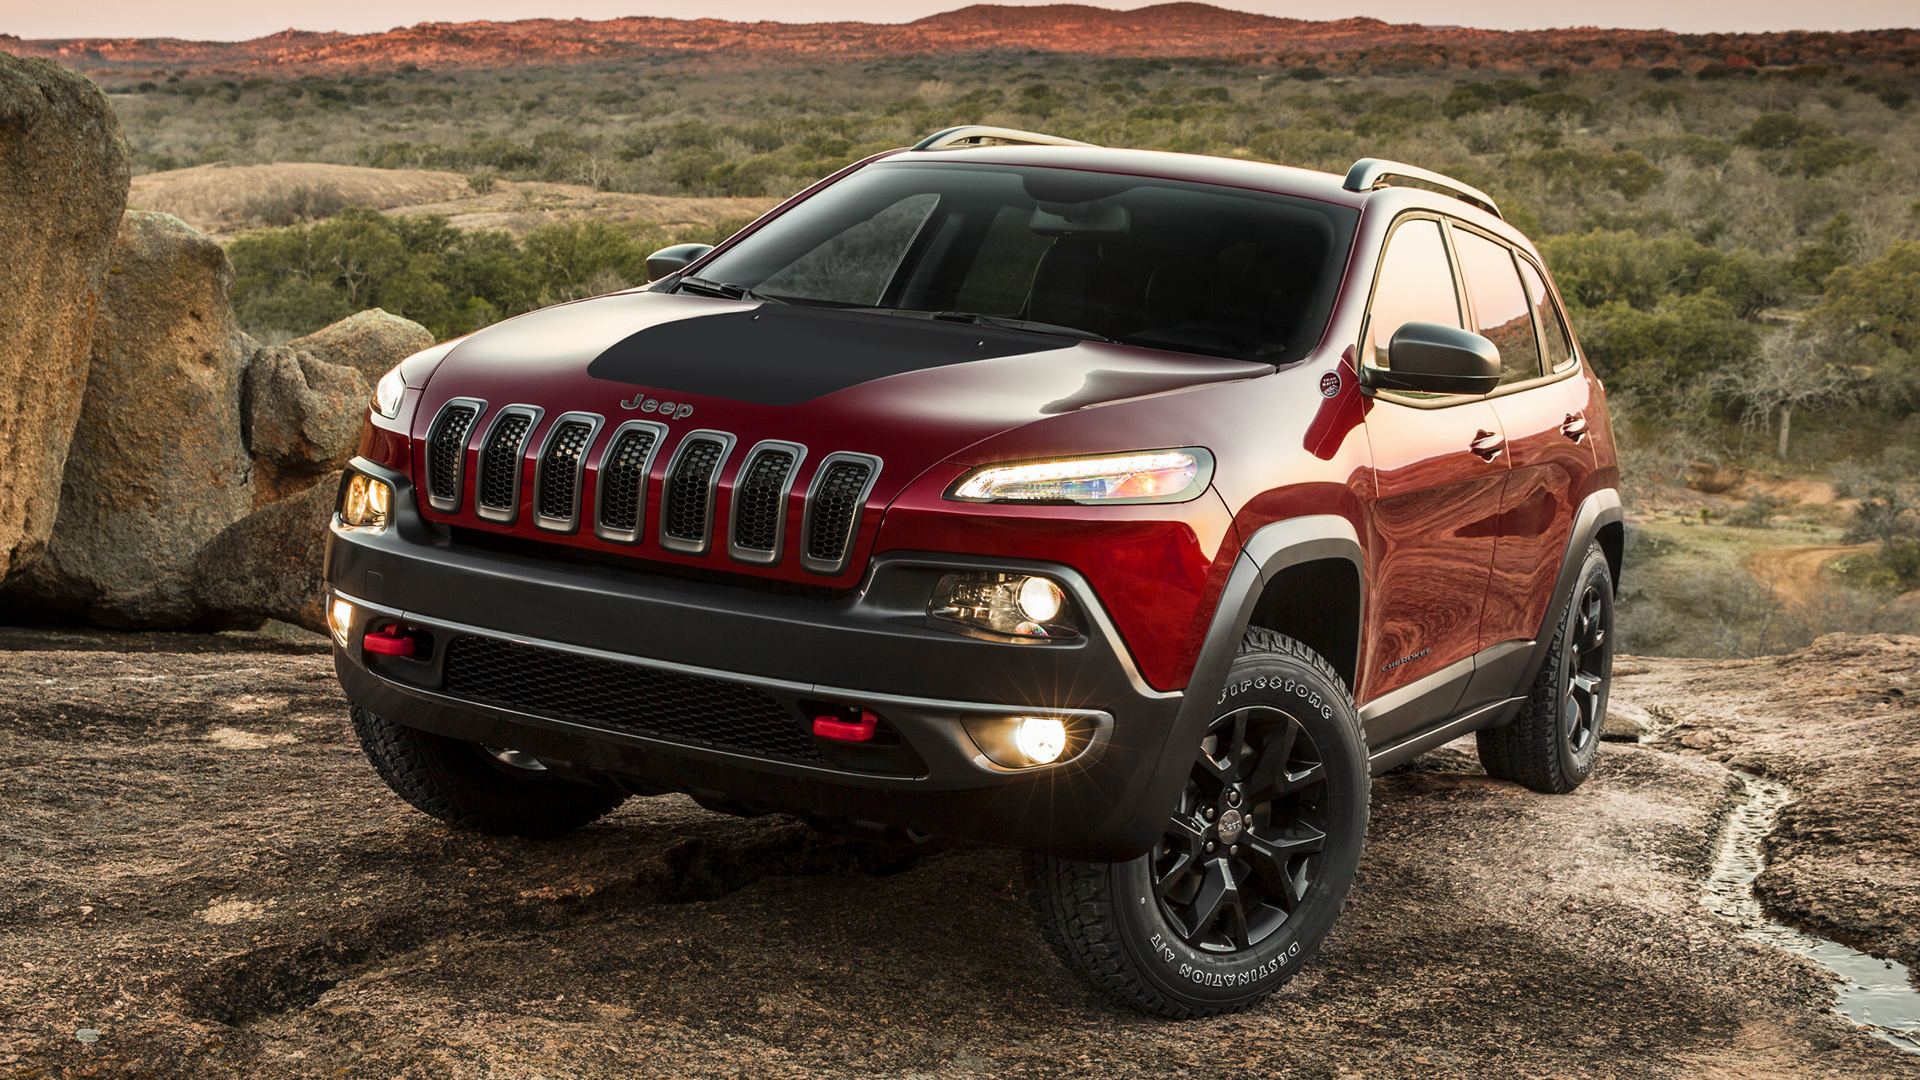 Jeep Cherokee Trailhawk (2014) Wallpapers and HD Images - Car Pixel